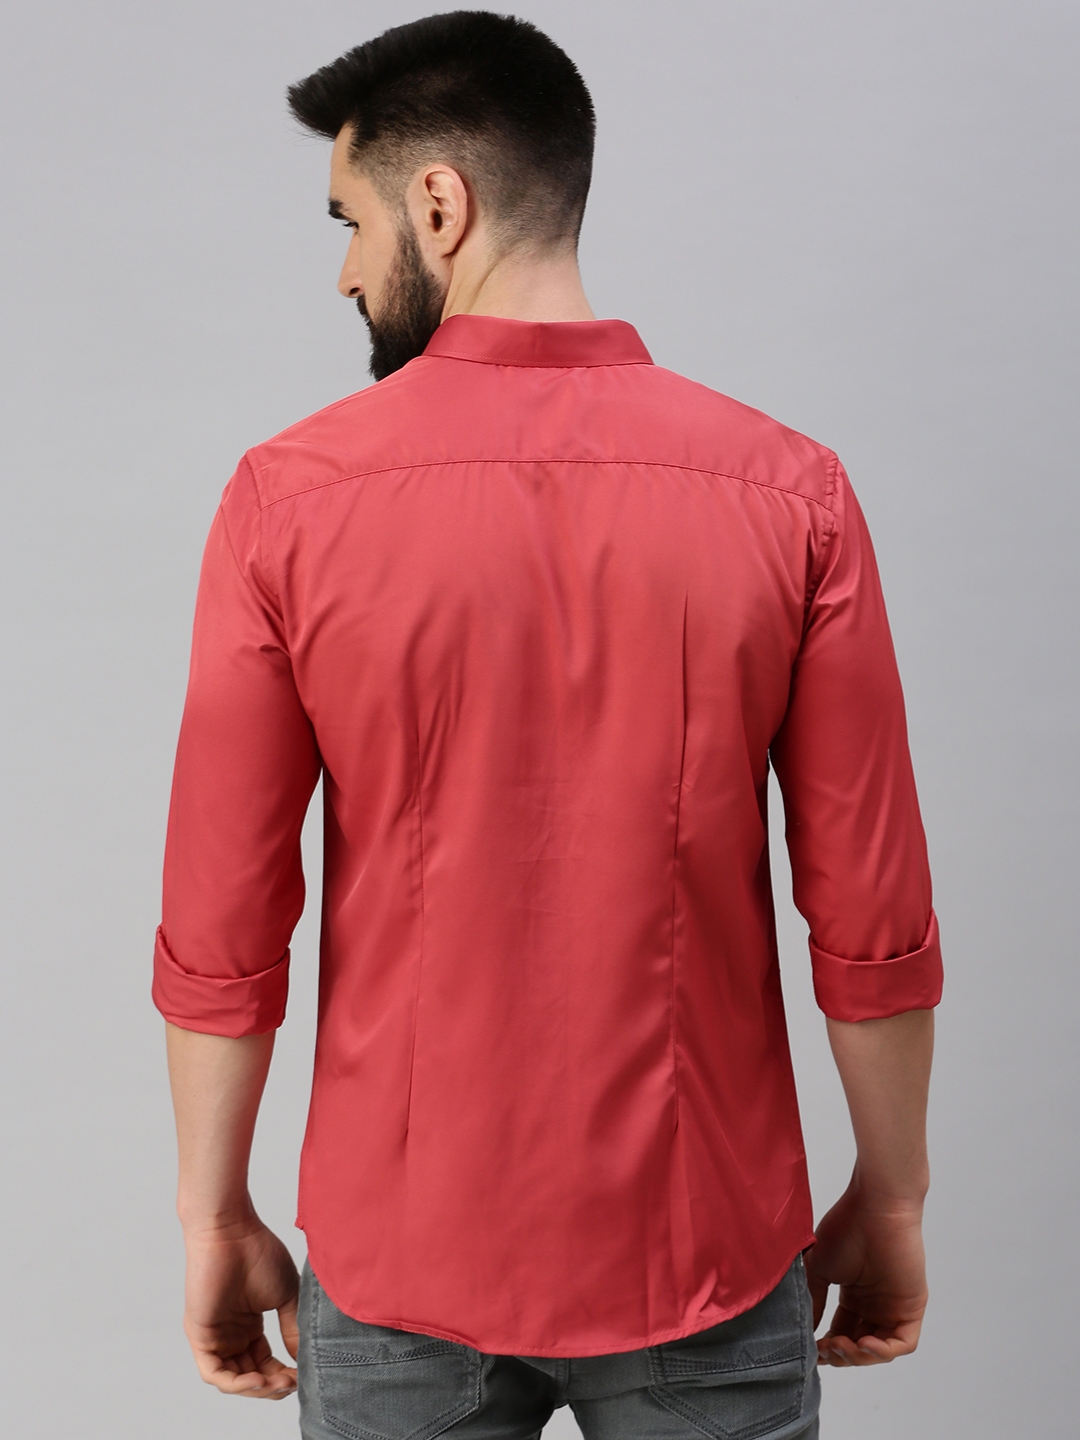 Men's Red Satin Solid Casual Shirts